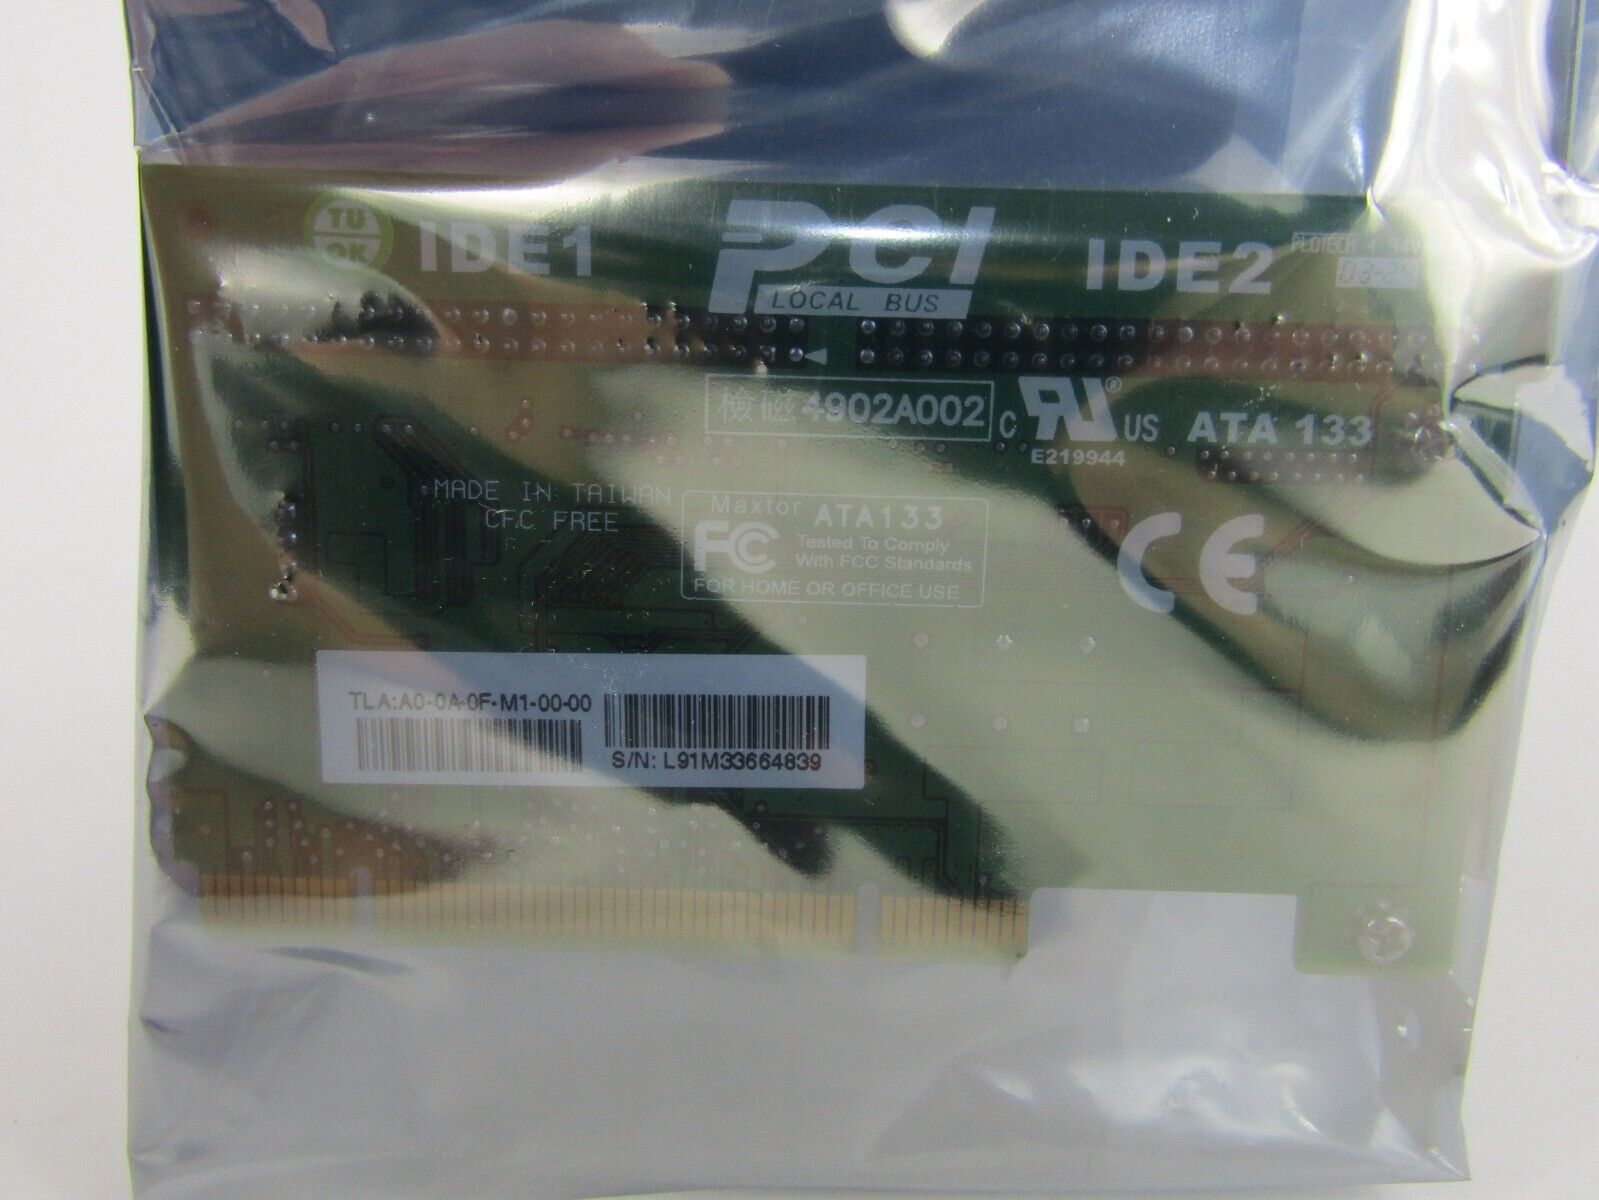 Maxtor Promise ATA133 2-Port PCI IDE Controller Card 10999690 New Sealed